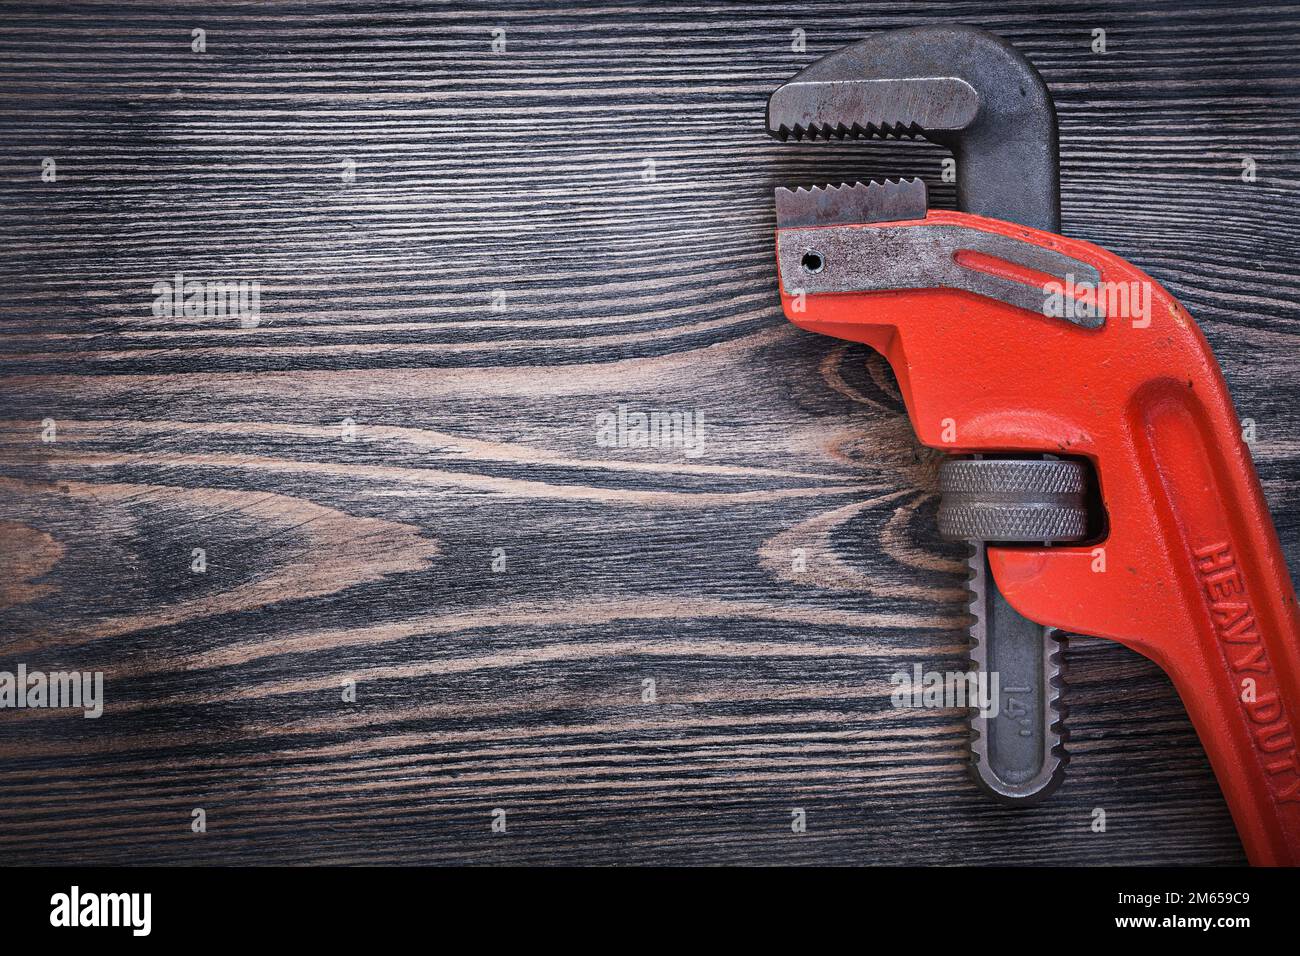 Adjustable pipe wrench on wooden board copy space plumbing concept. Stock Photo